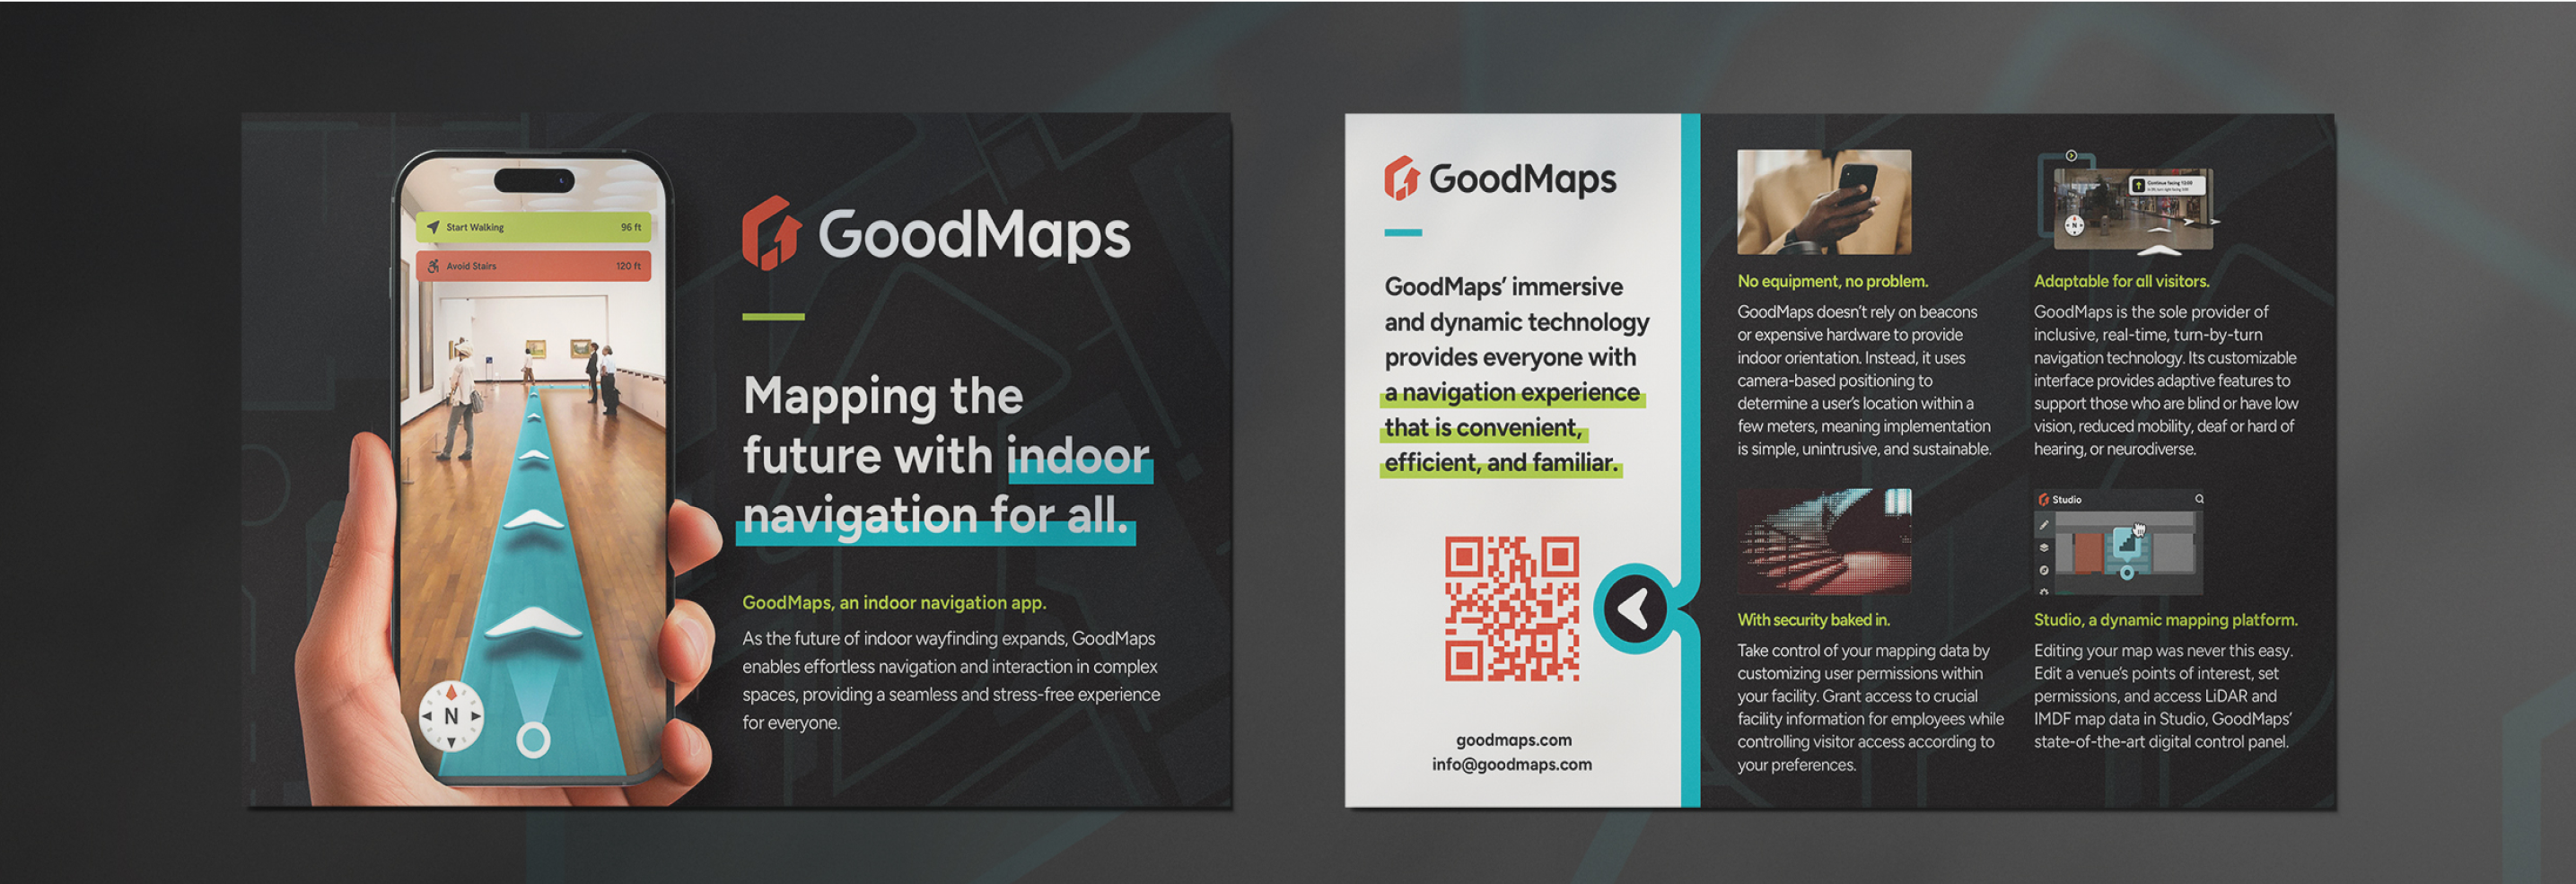 Mockups of Goodmaps marketing collateral